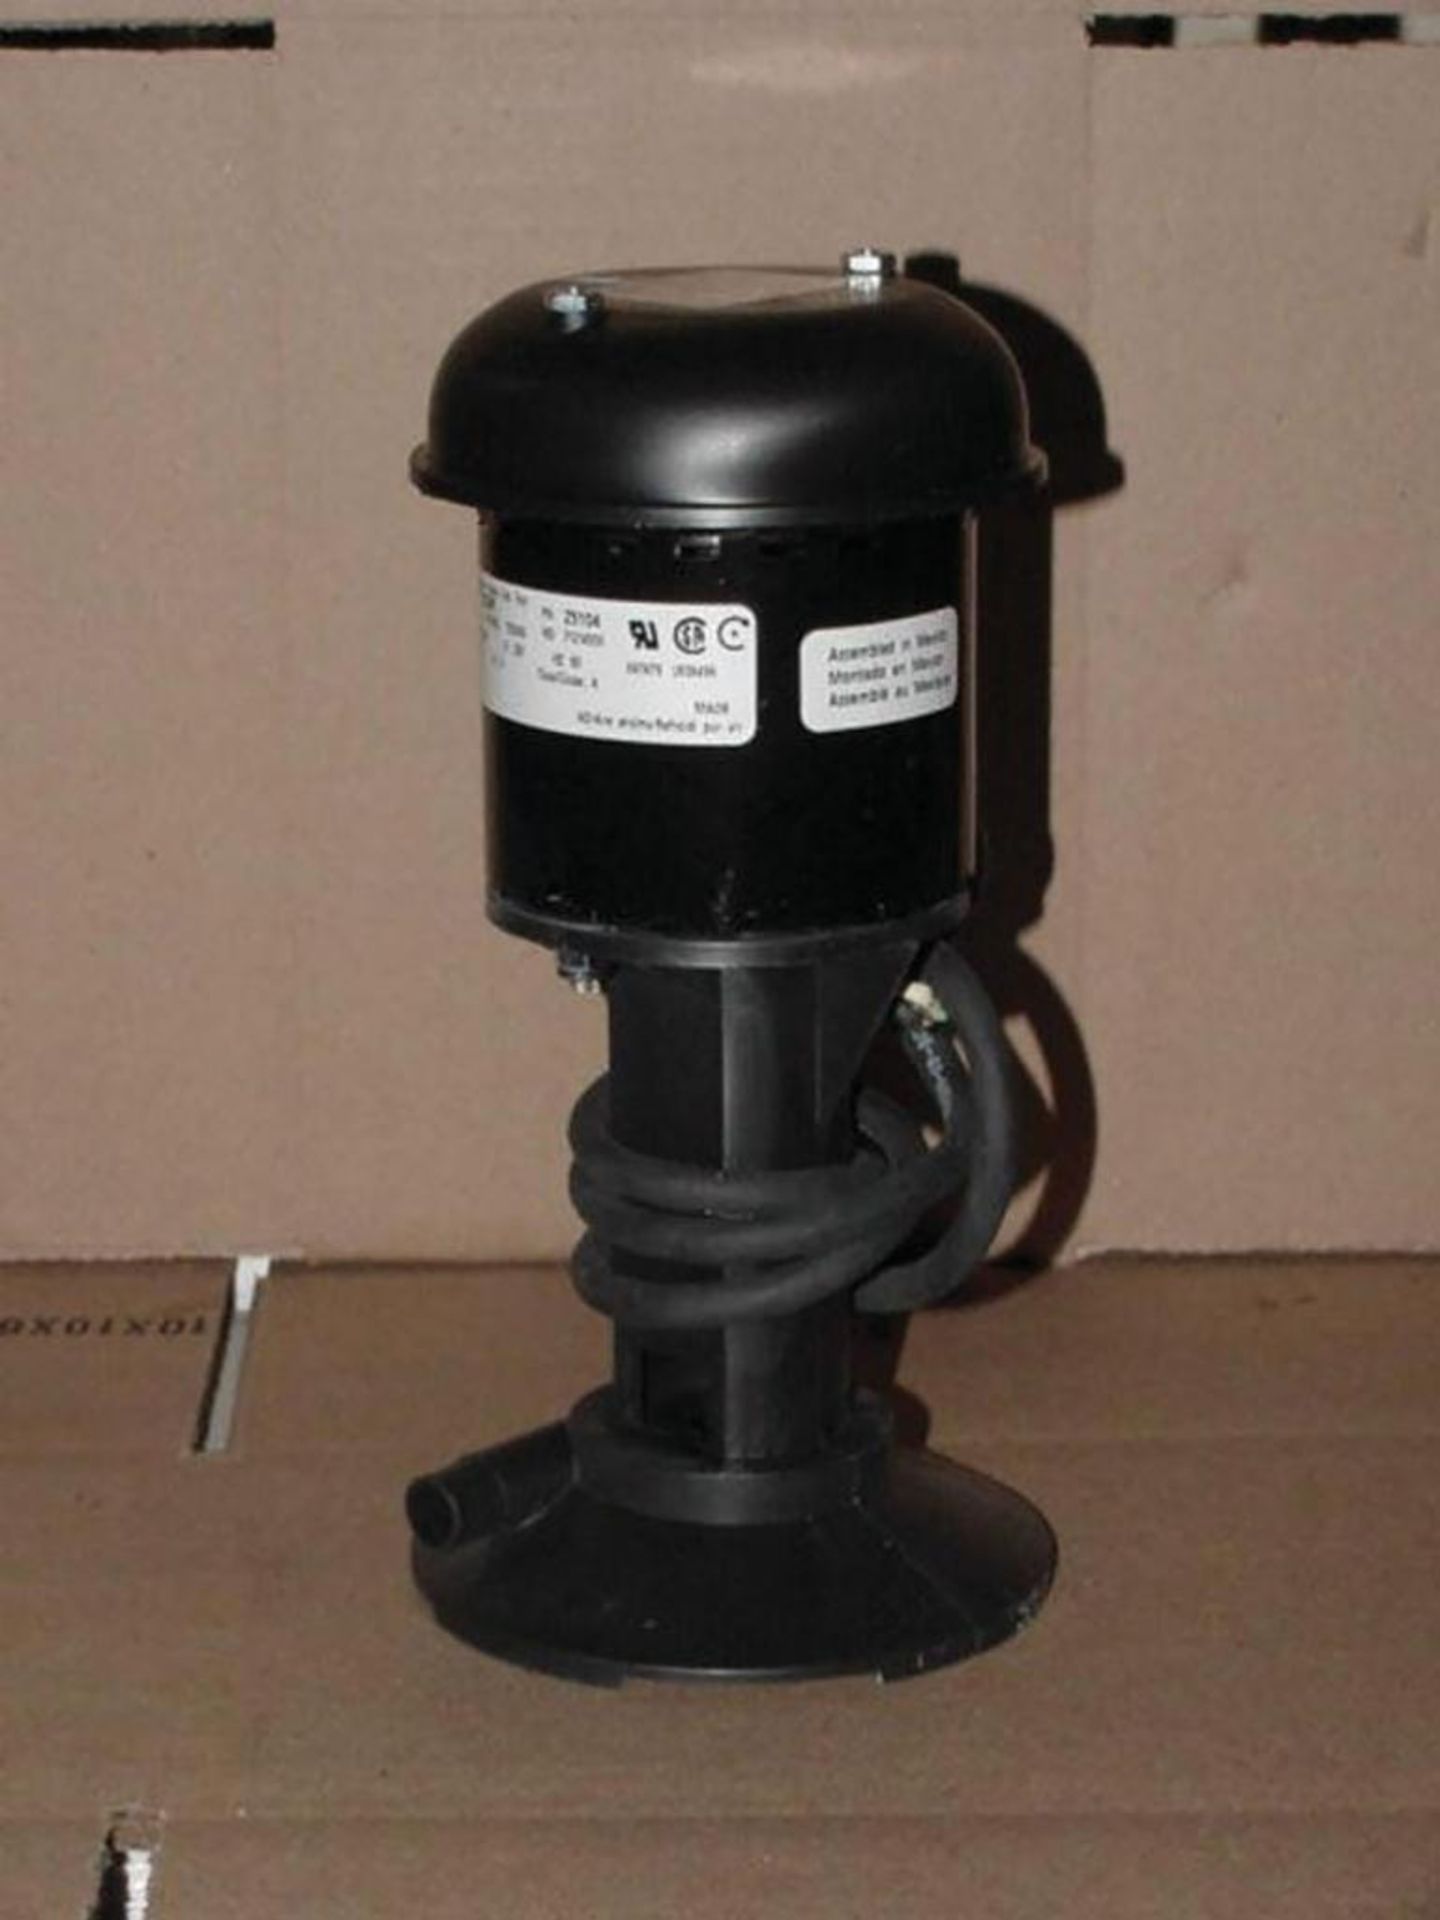 (216) Beckett Coolant/Recirculating Pumps, Model BJ5C, 1/70 Hp, Voltage: 230,1 Phase Body Material P